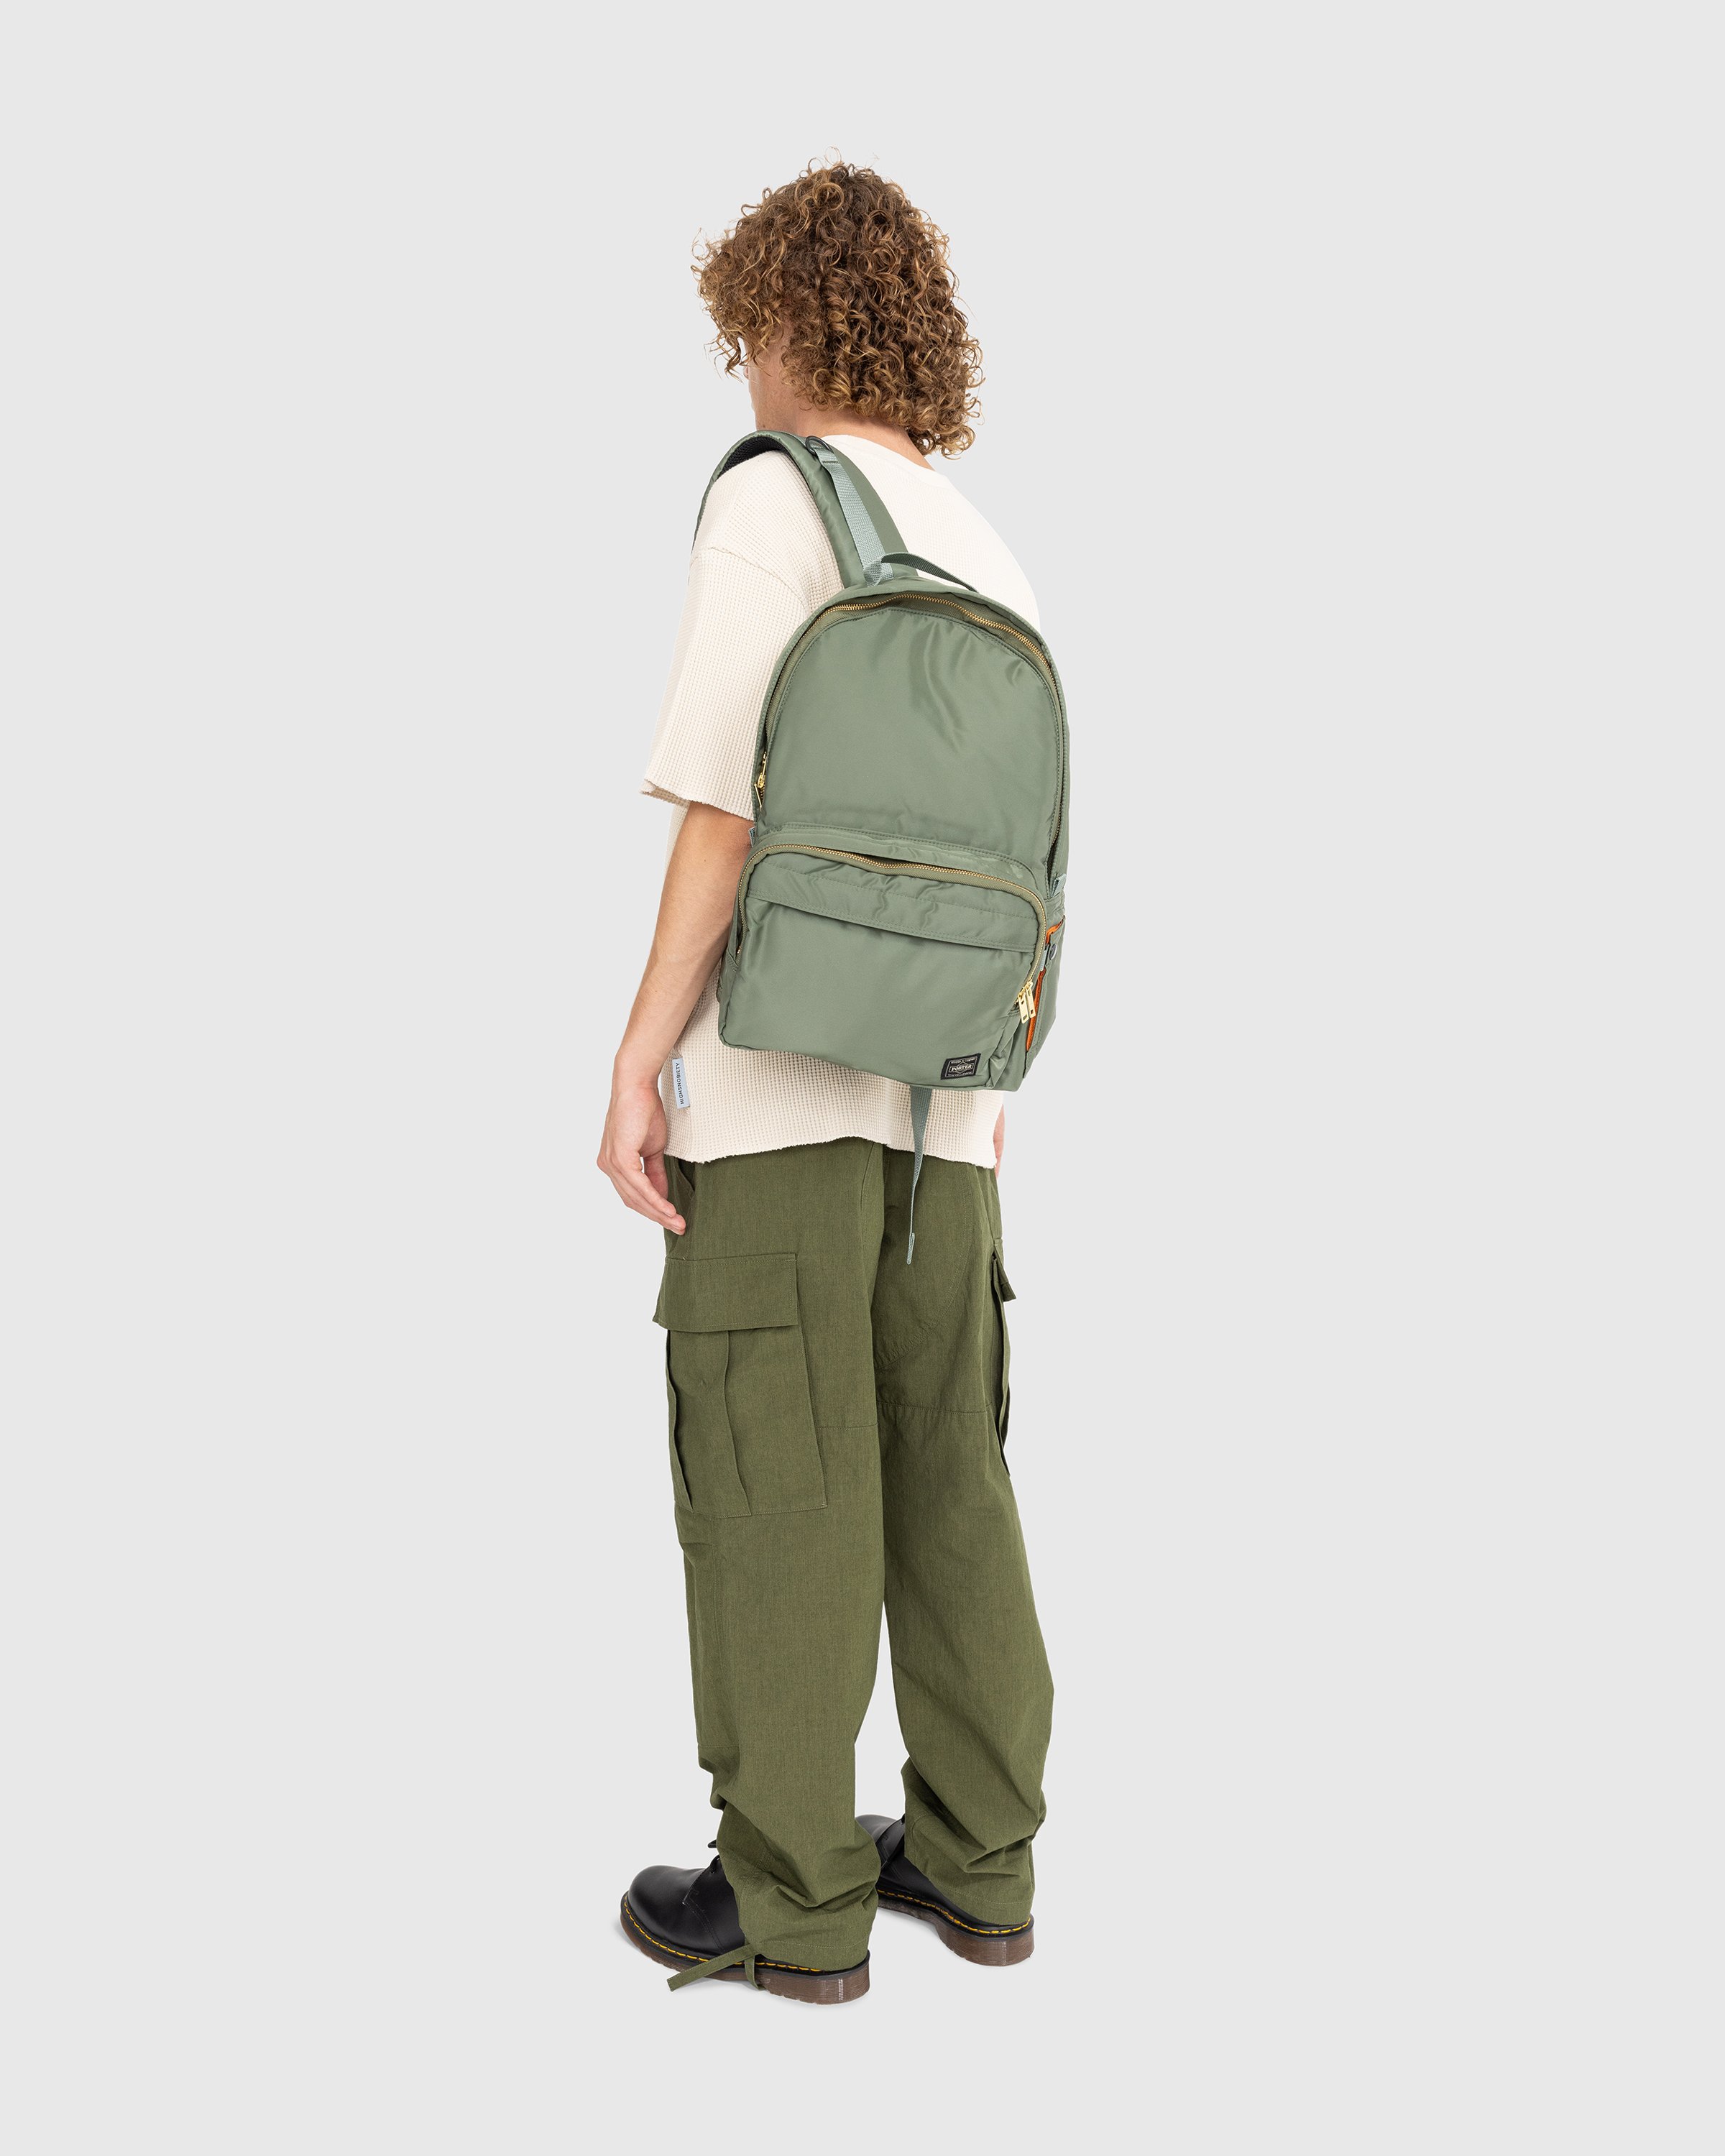 Porter-Yoshida & Co. - Tanker Day Pack - Accessories - Green - Image 4